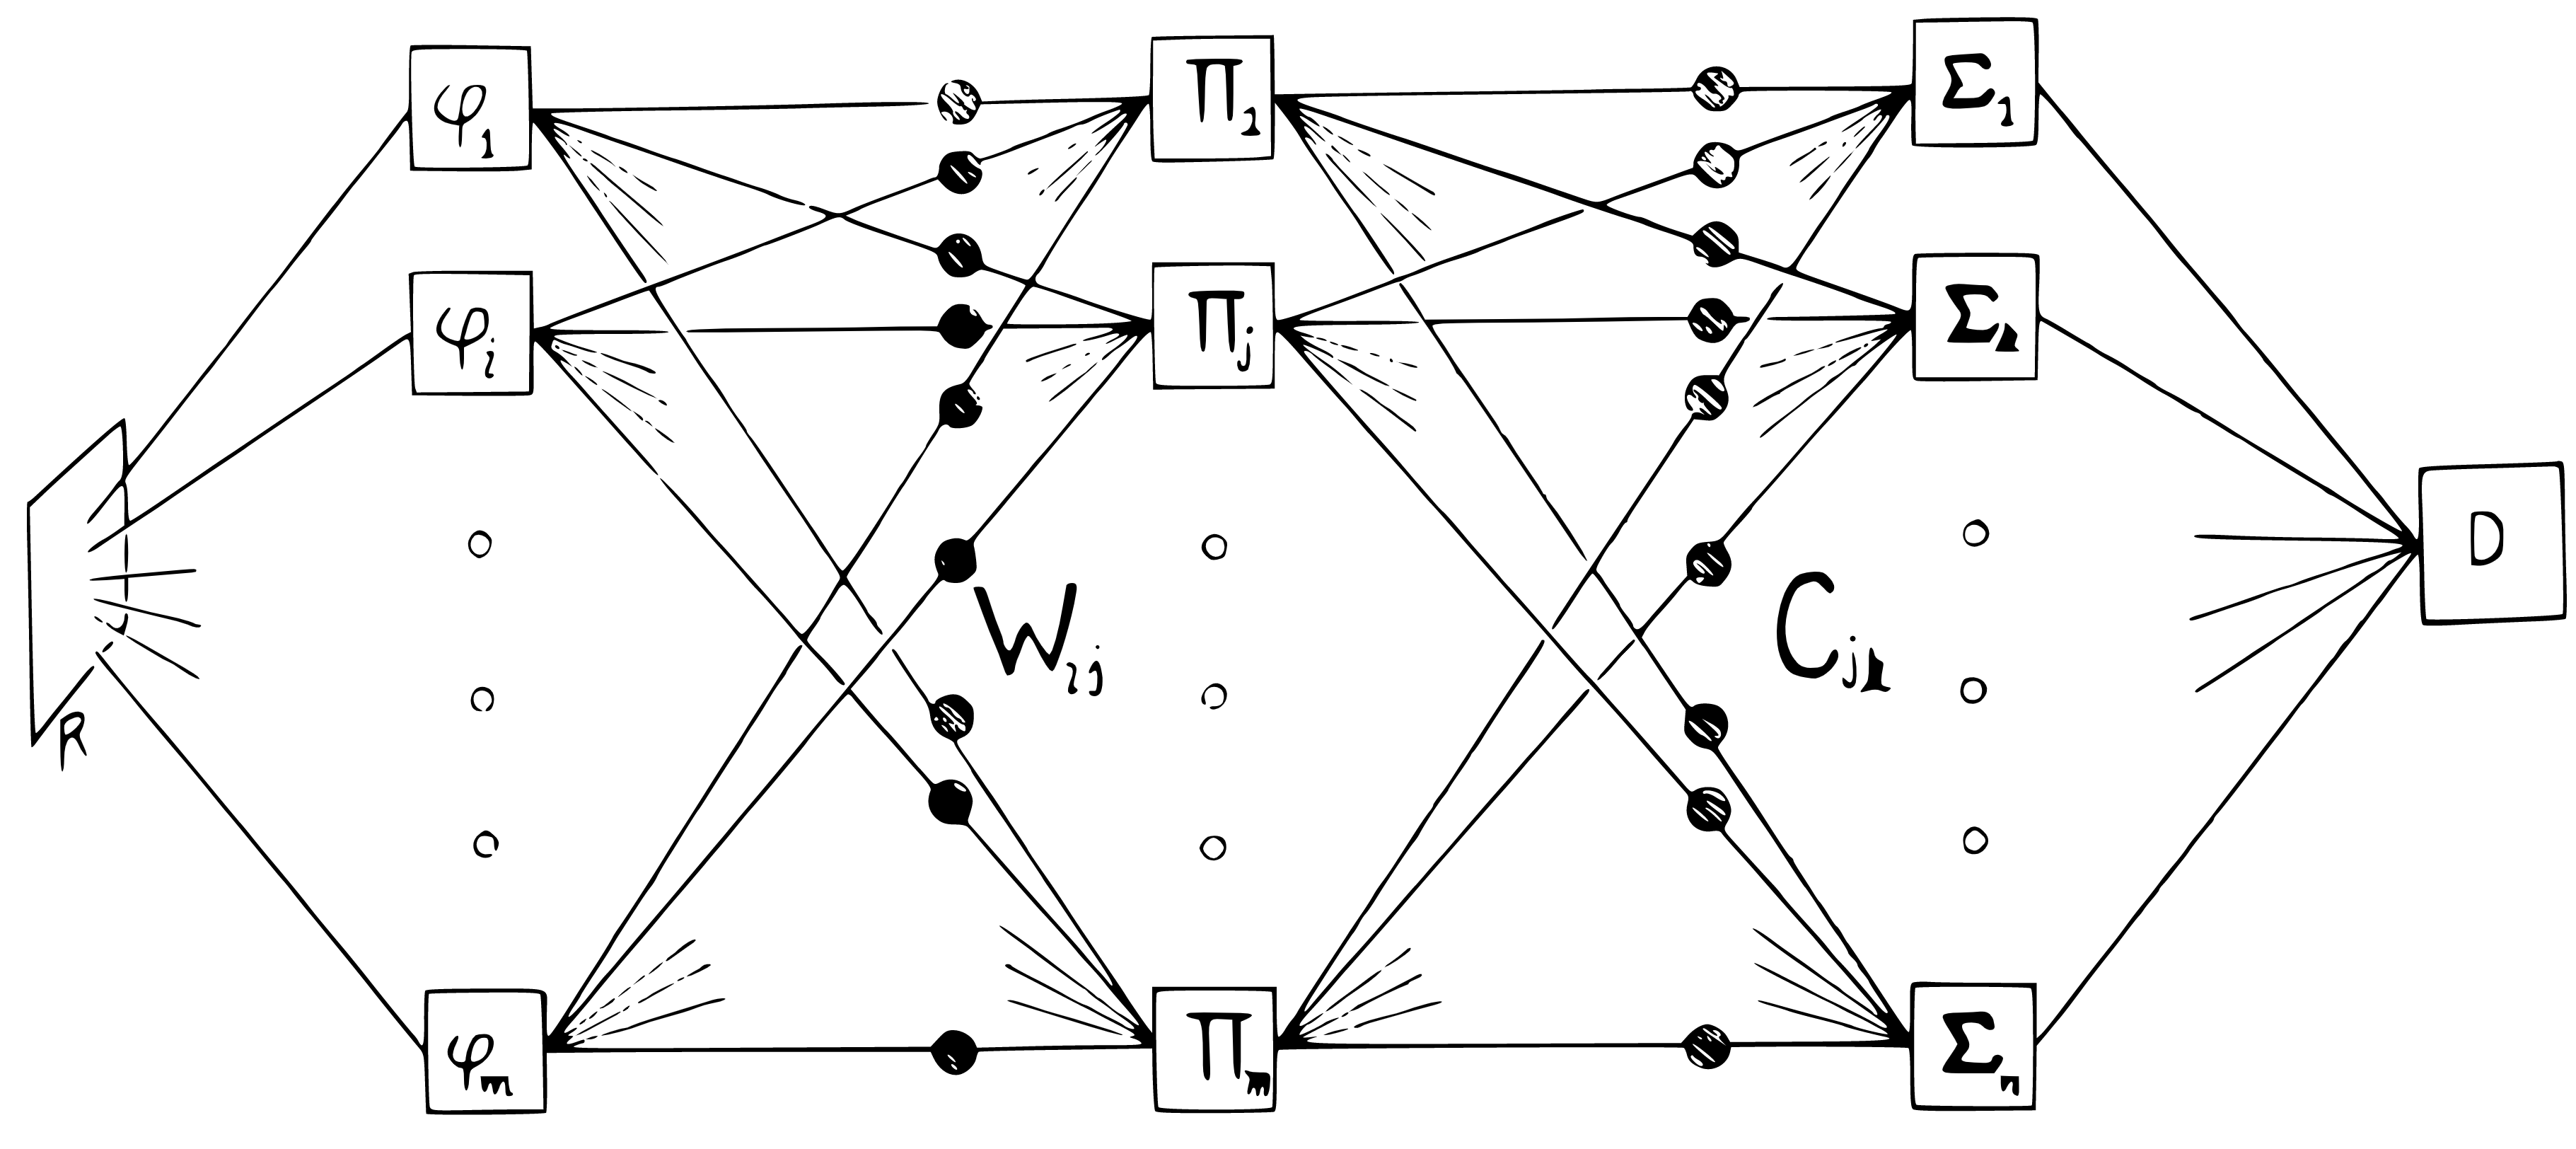 Layered perceptrons, as illustrated in the book Perceptrons